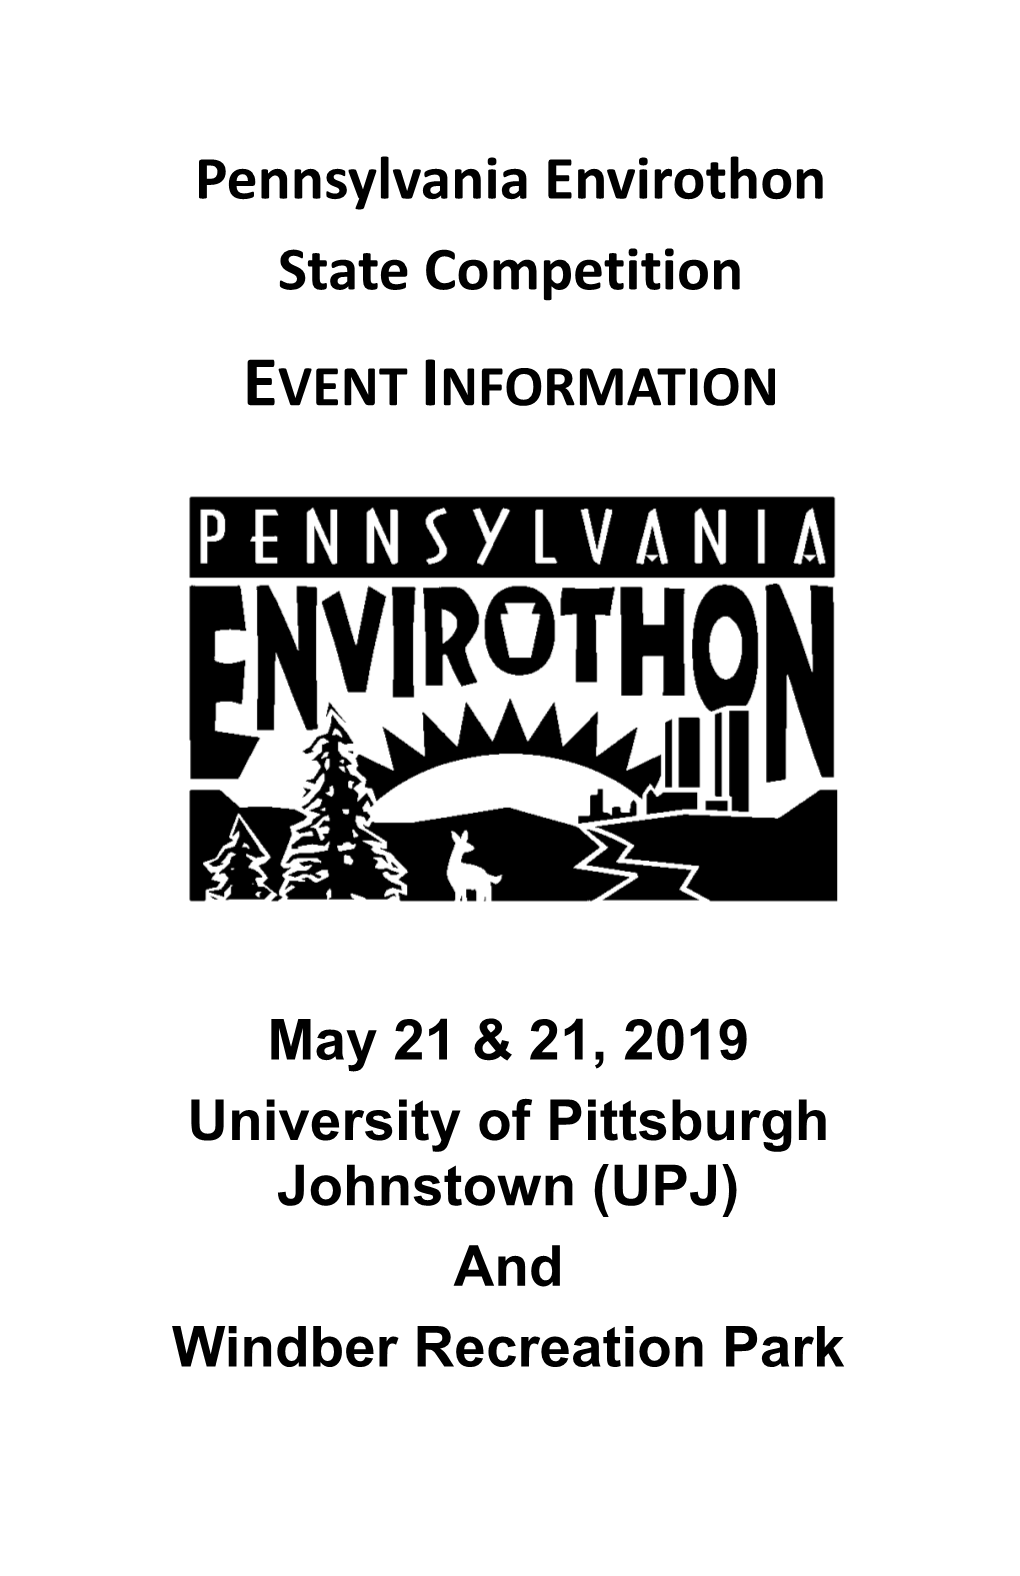 Pennsylvania Envirothon State Competition EVENT INFORMATION